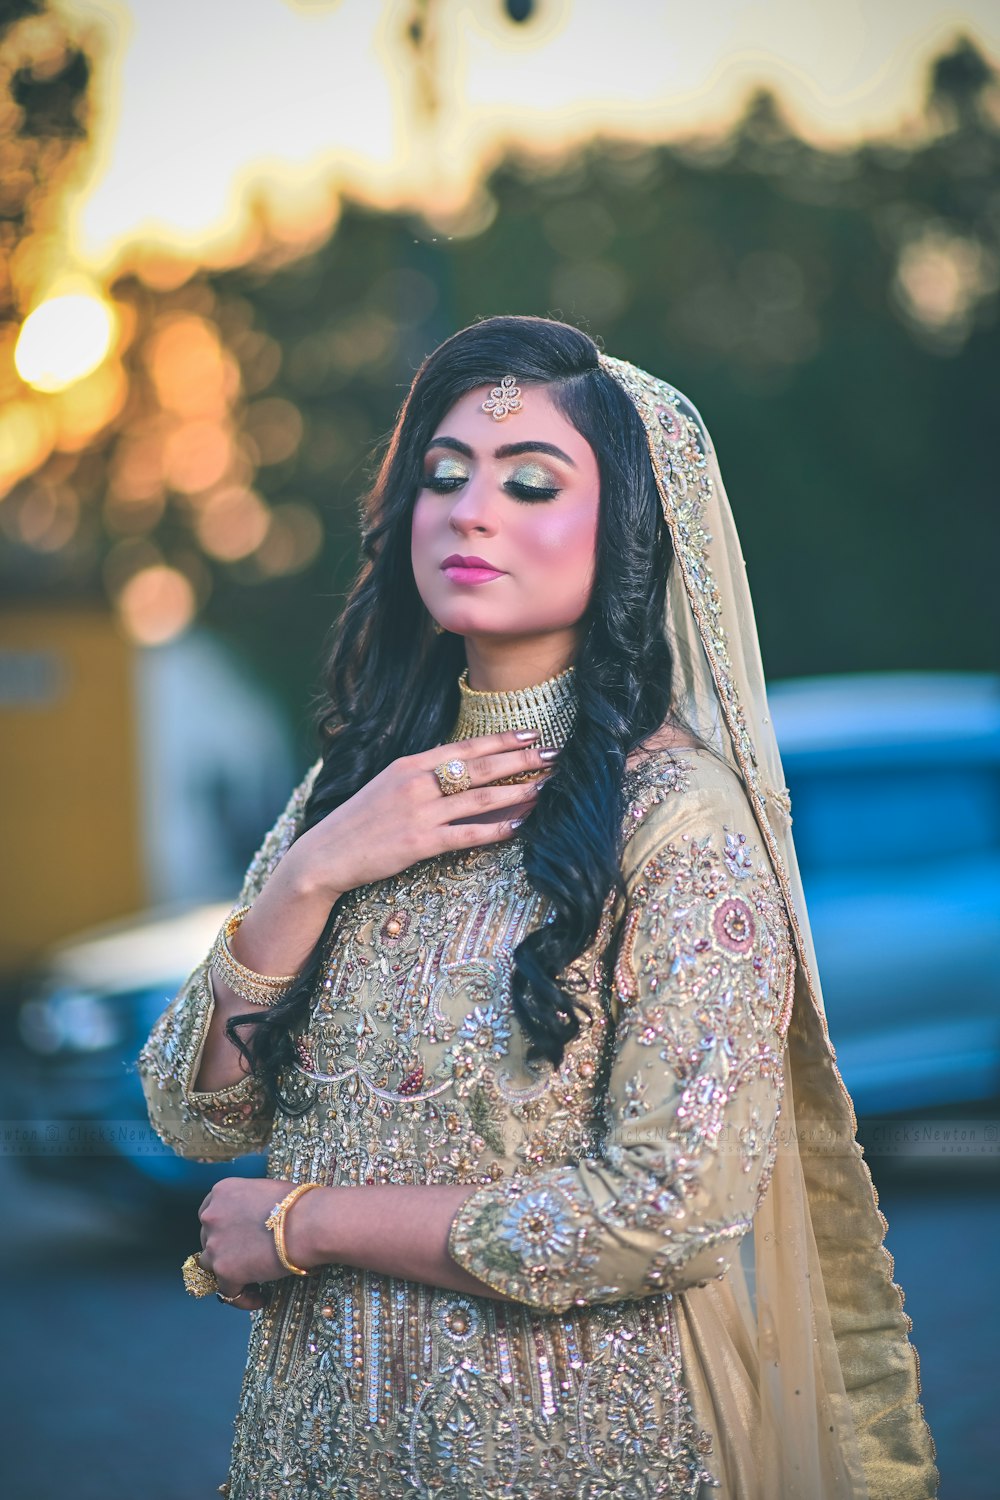 a woman in a bridal outfit poses for a picture